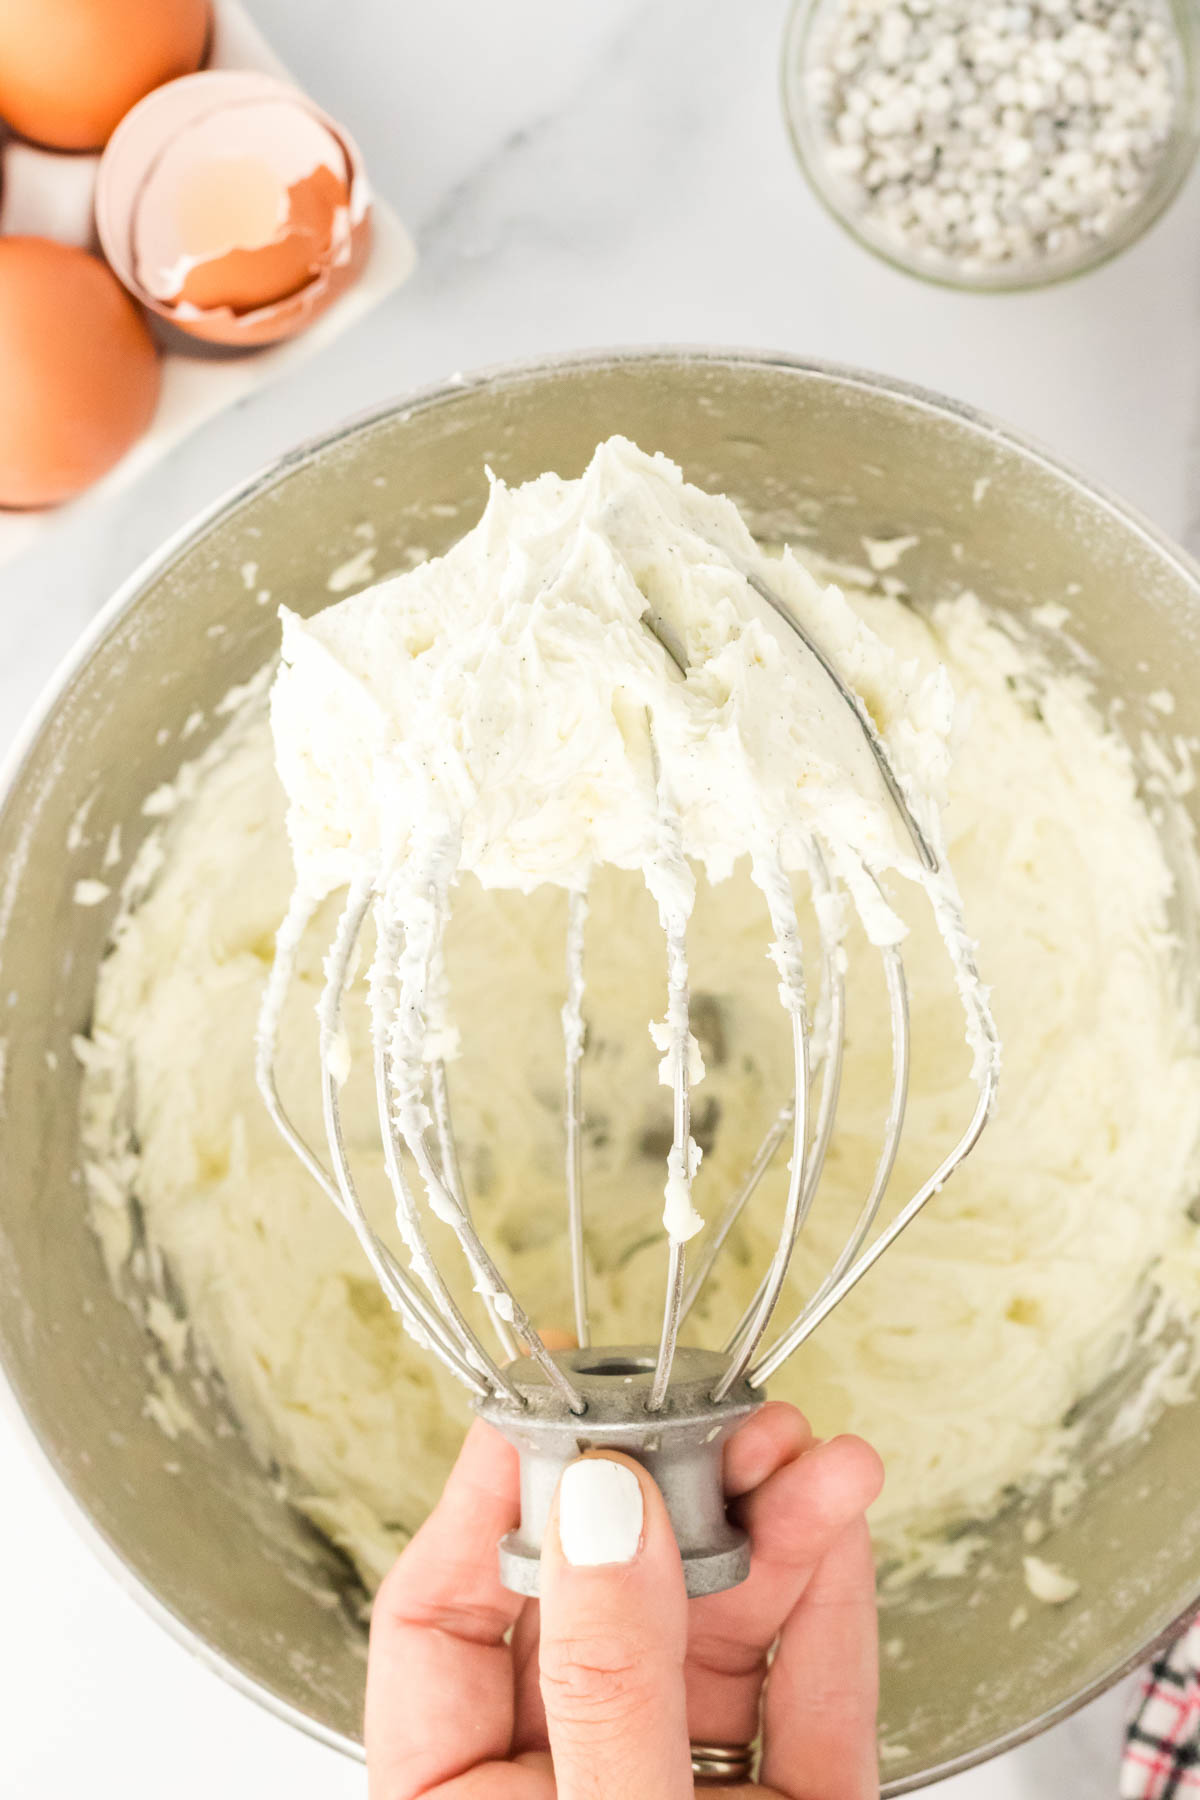 A person using a whisk to make frosting